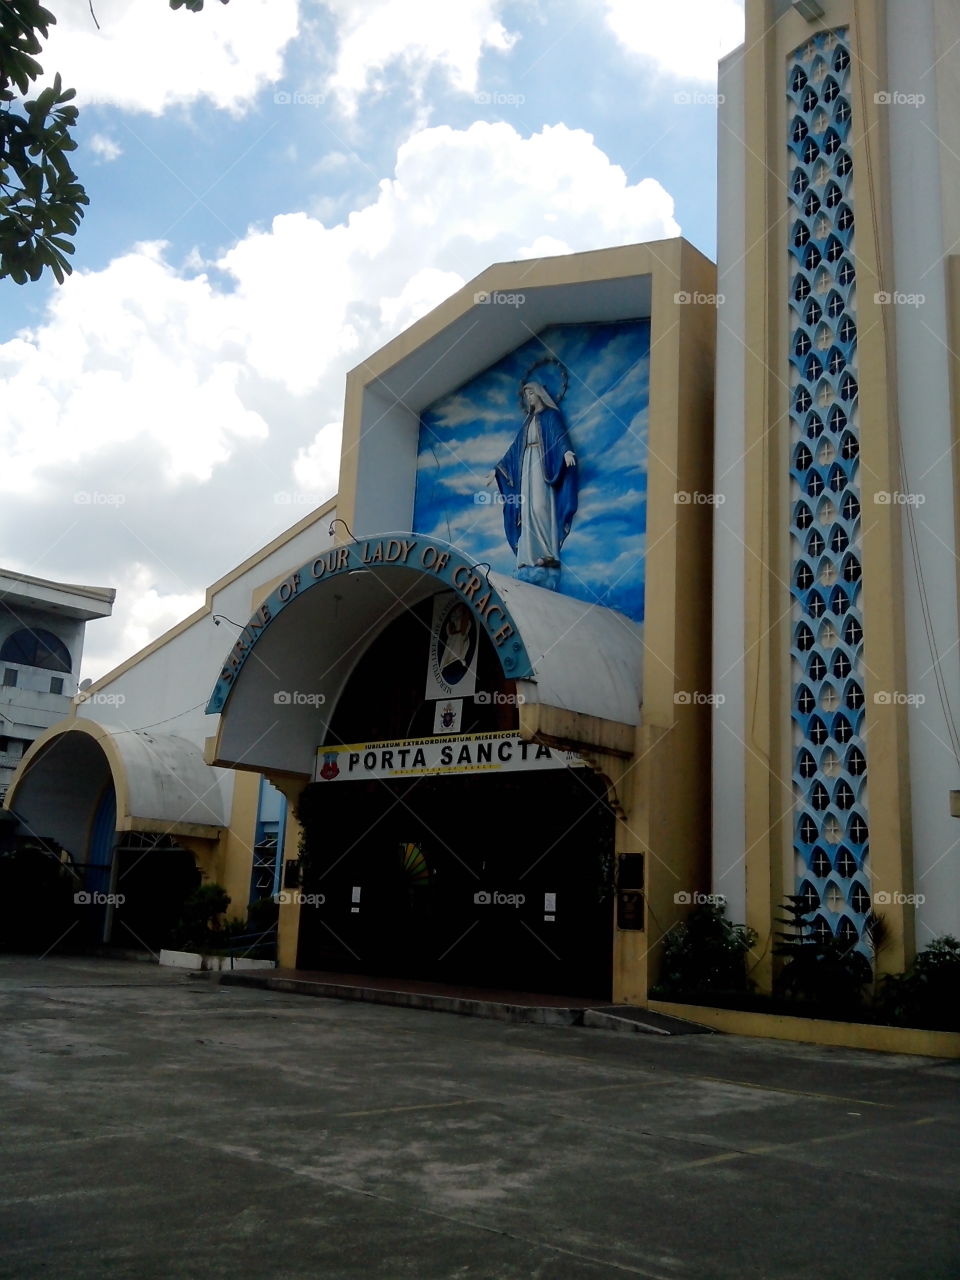 Catholic Church of Our Lady of Grace